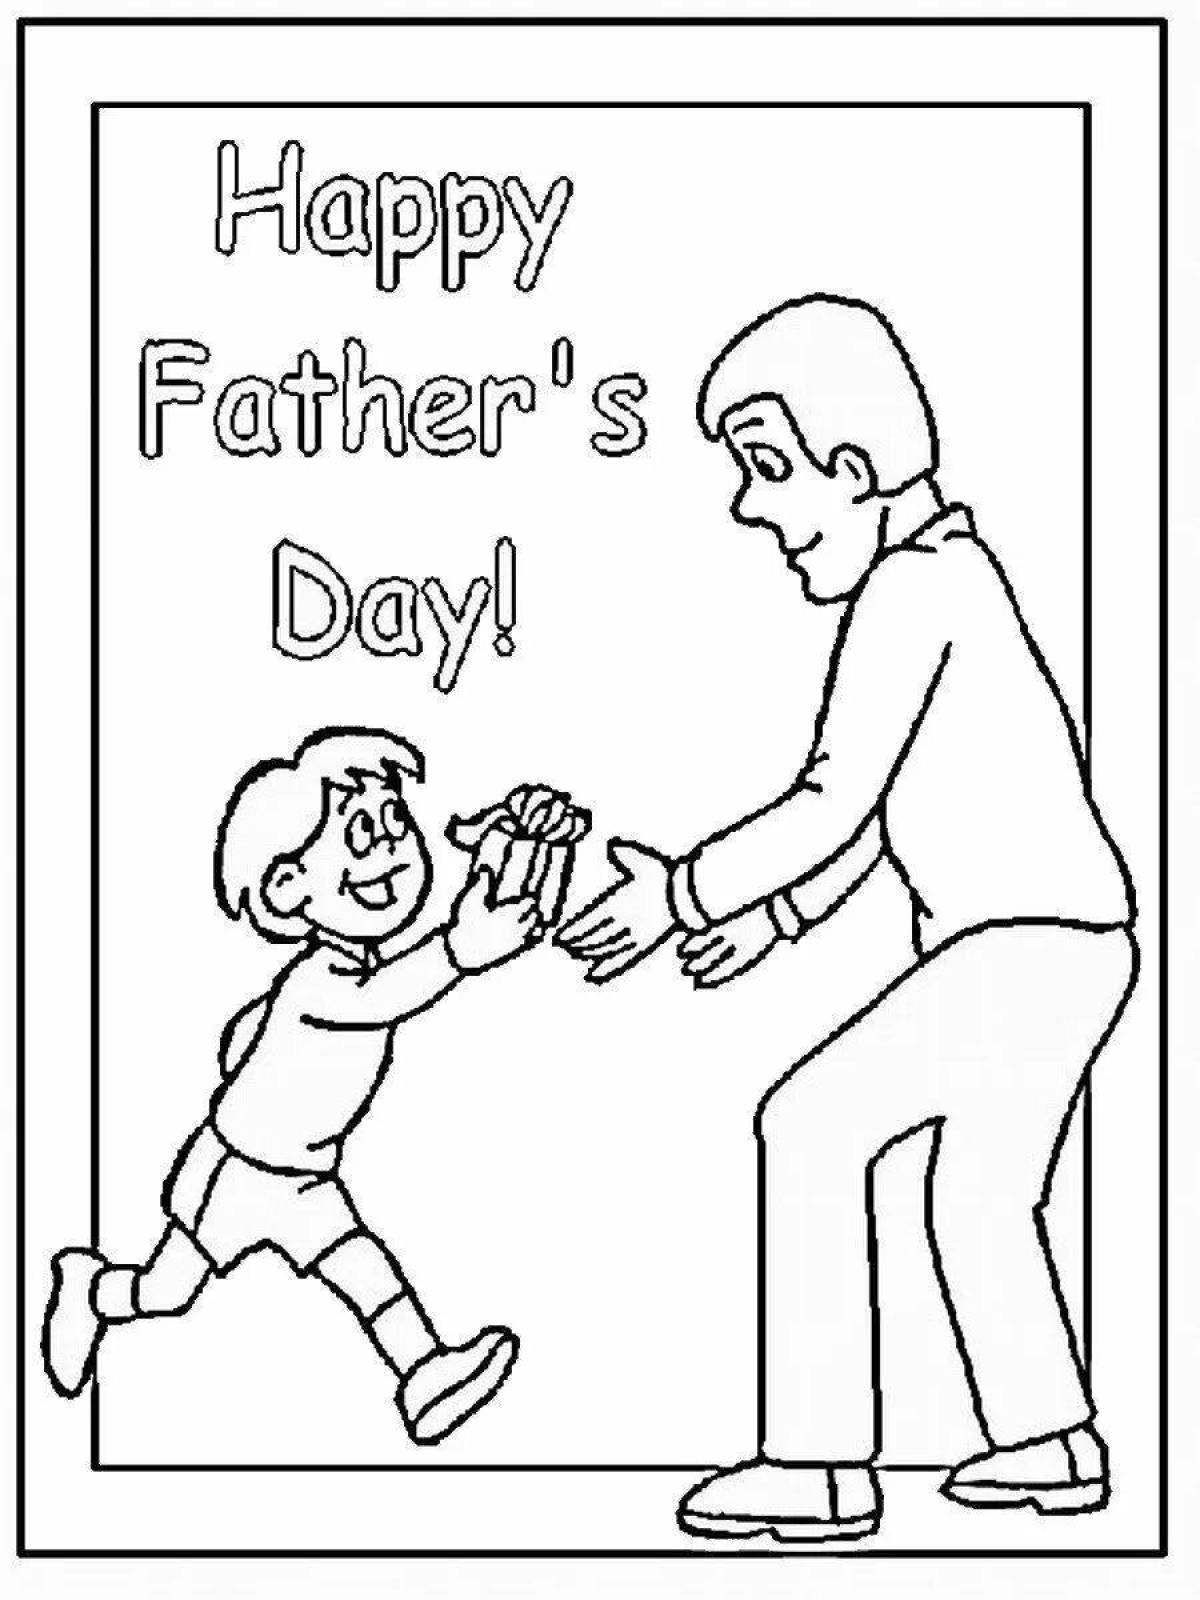 Cute coloring book for dad for dad's day